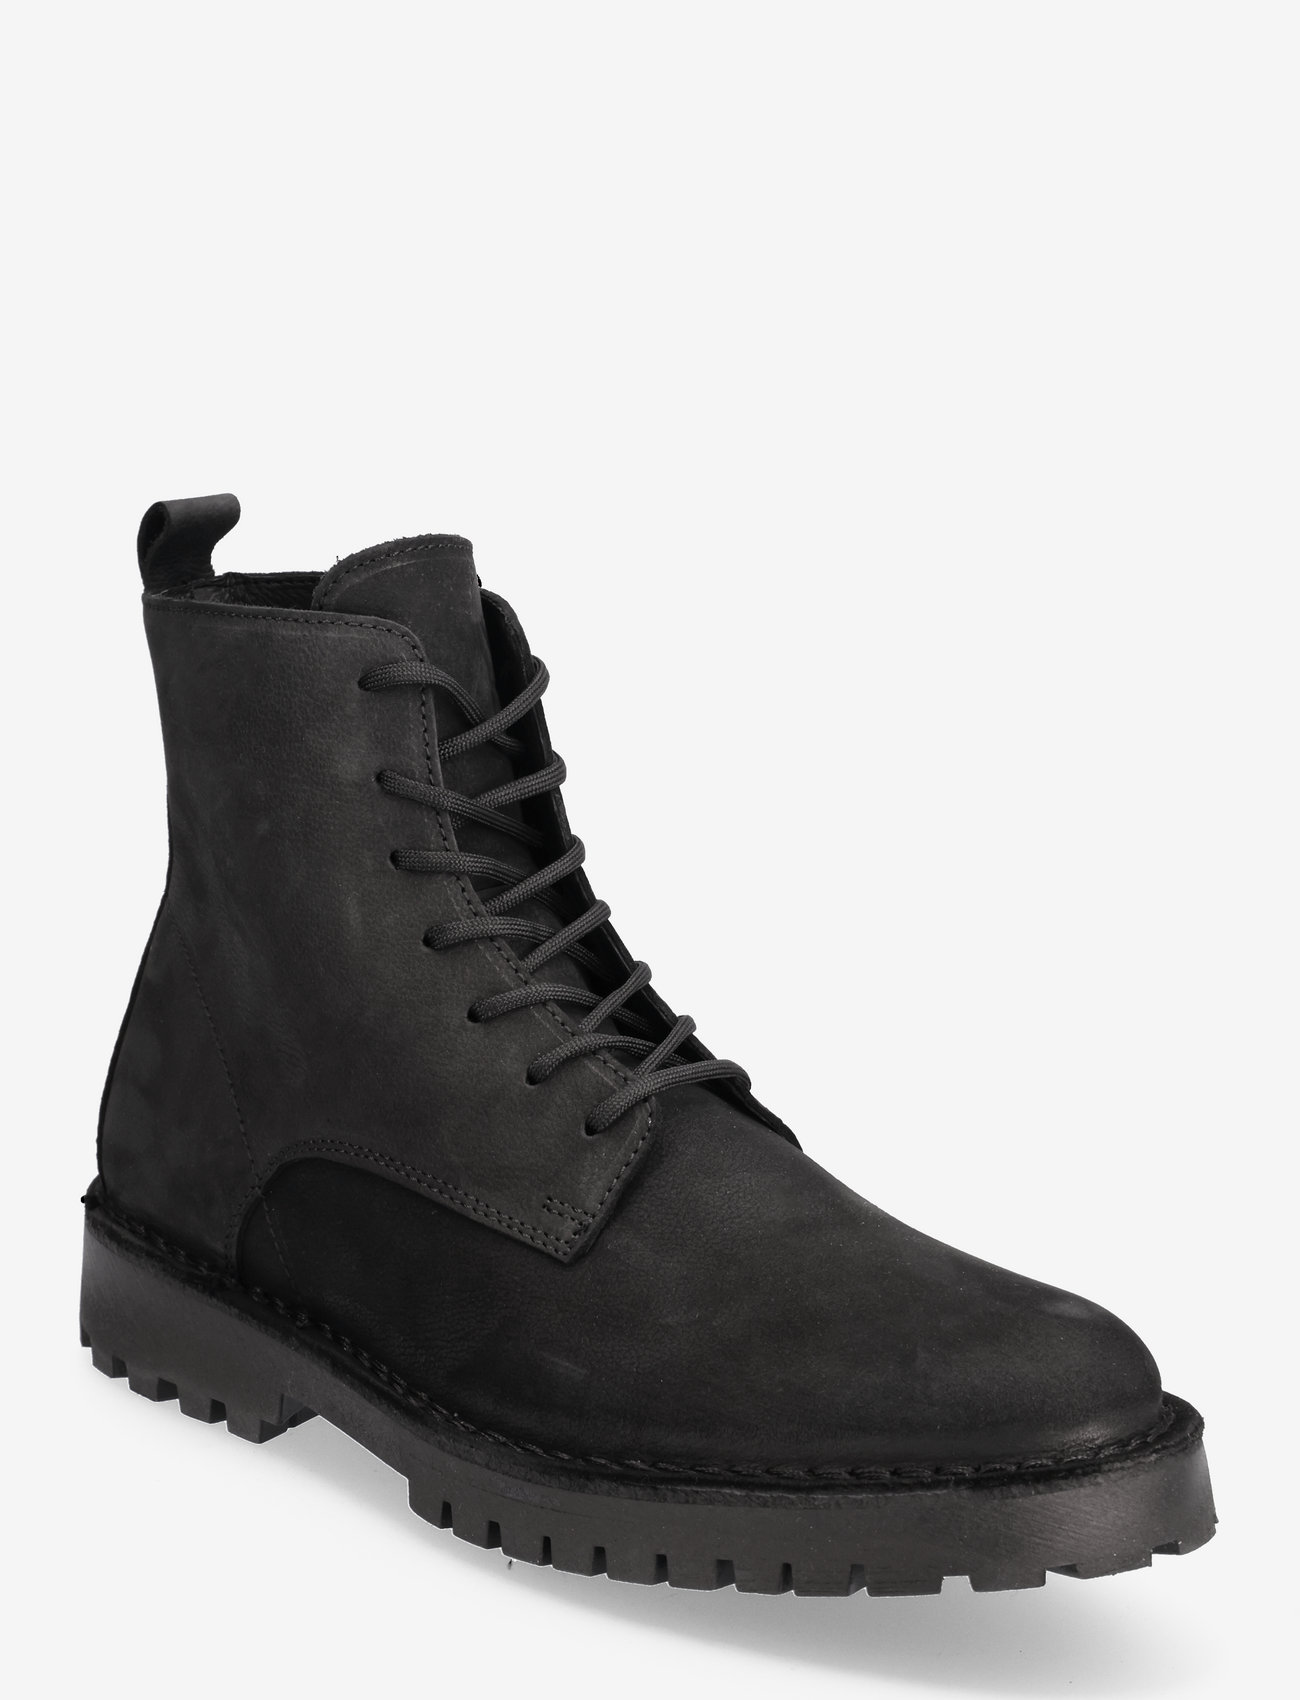 Selected Homme - SLHRICKY NUBUCK LACE-UP BOOT B - veter schoenen - black - 0